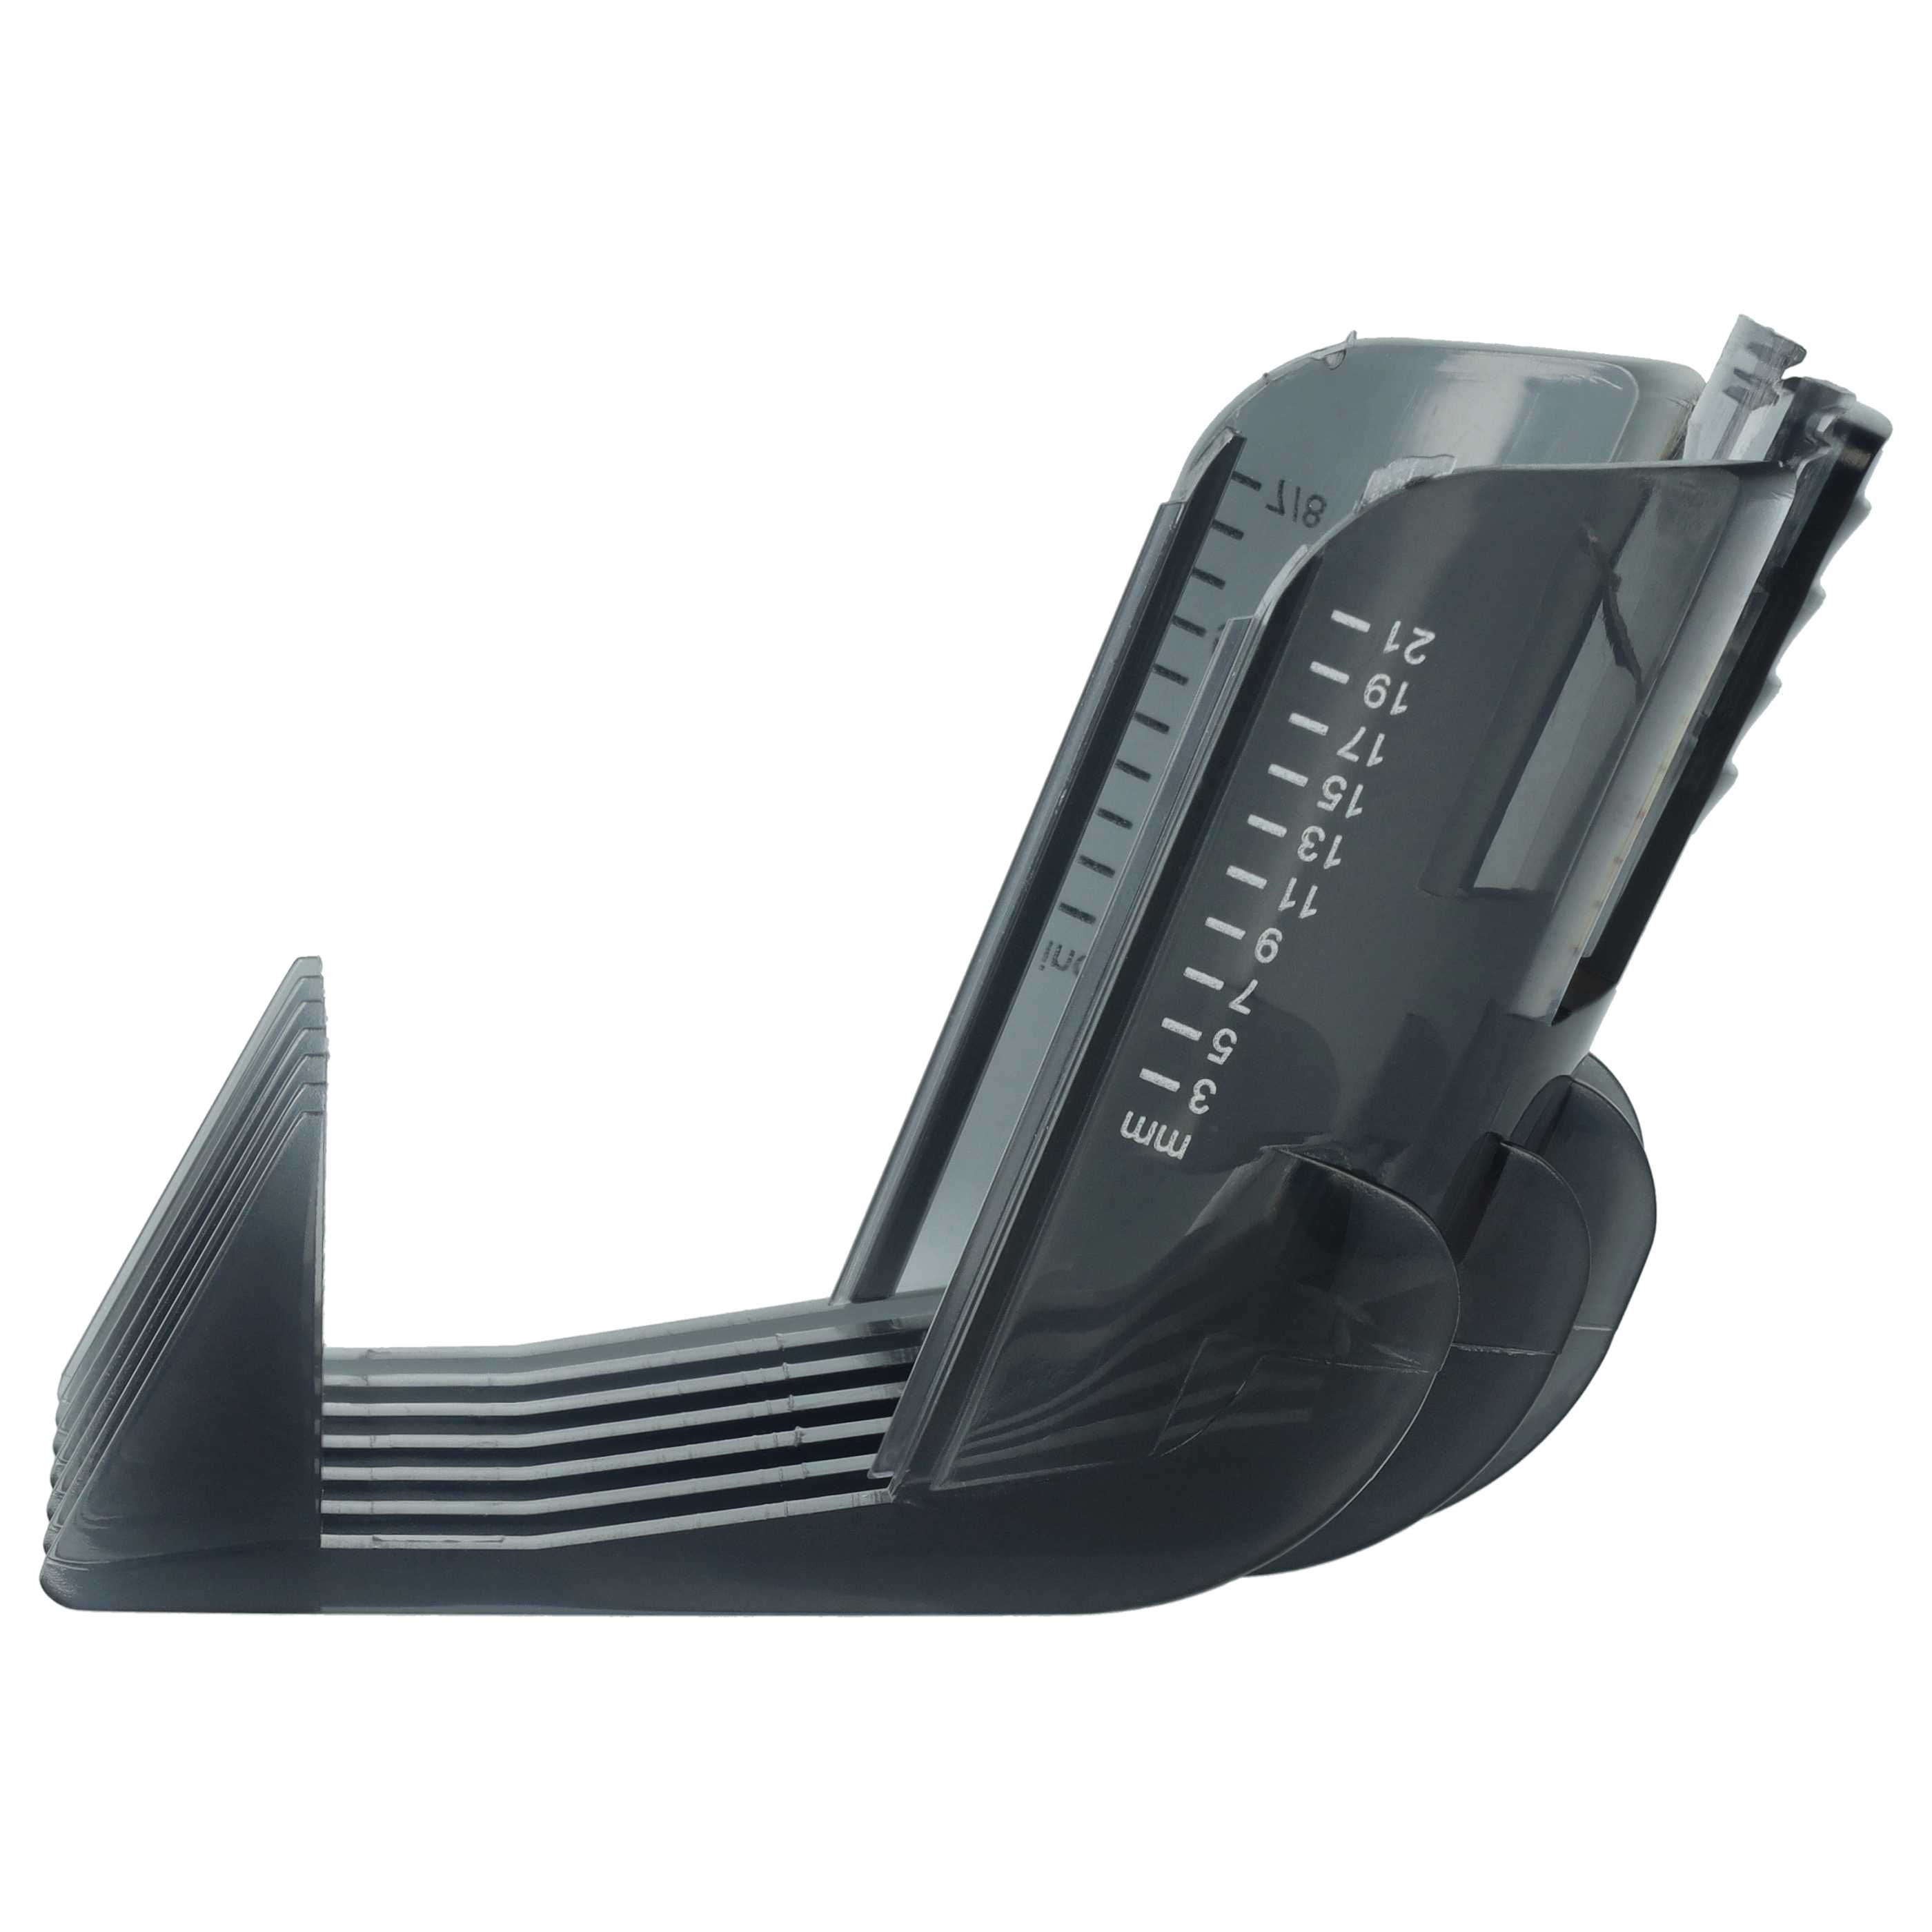 3 - 21 mm (1/8" - 7/8") Comb Attachment replaces Philips CRP389 for Philips Hair Clippers 